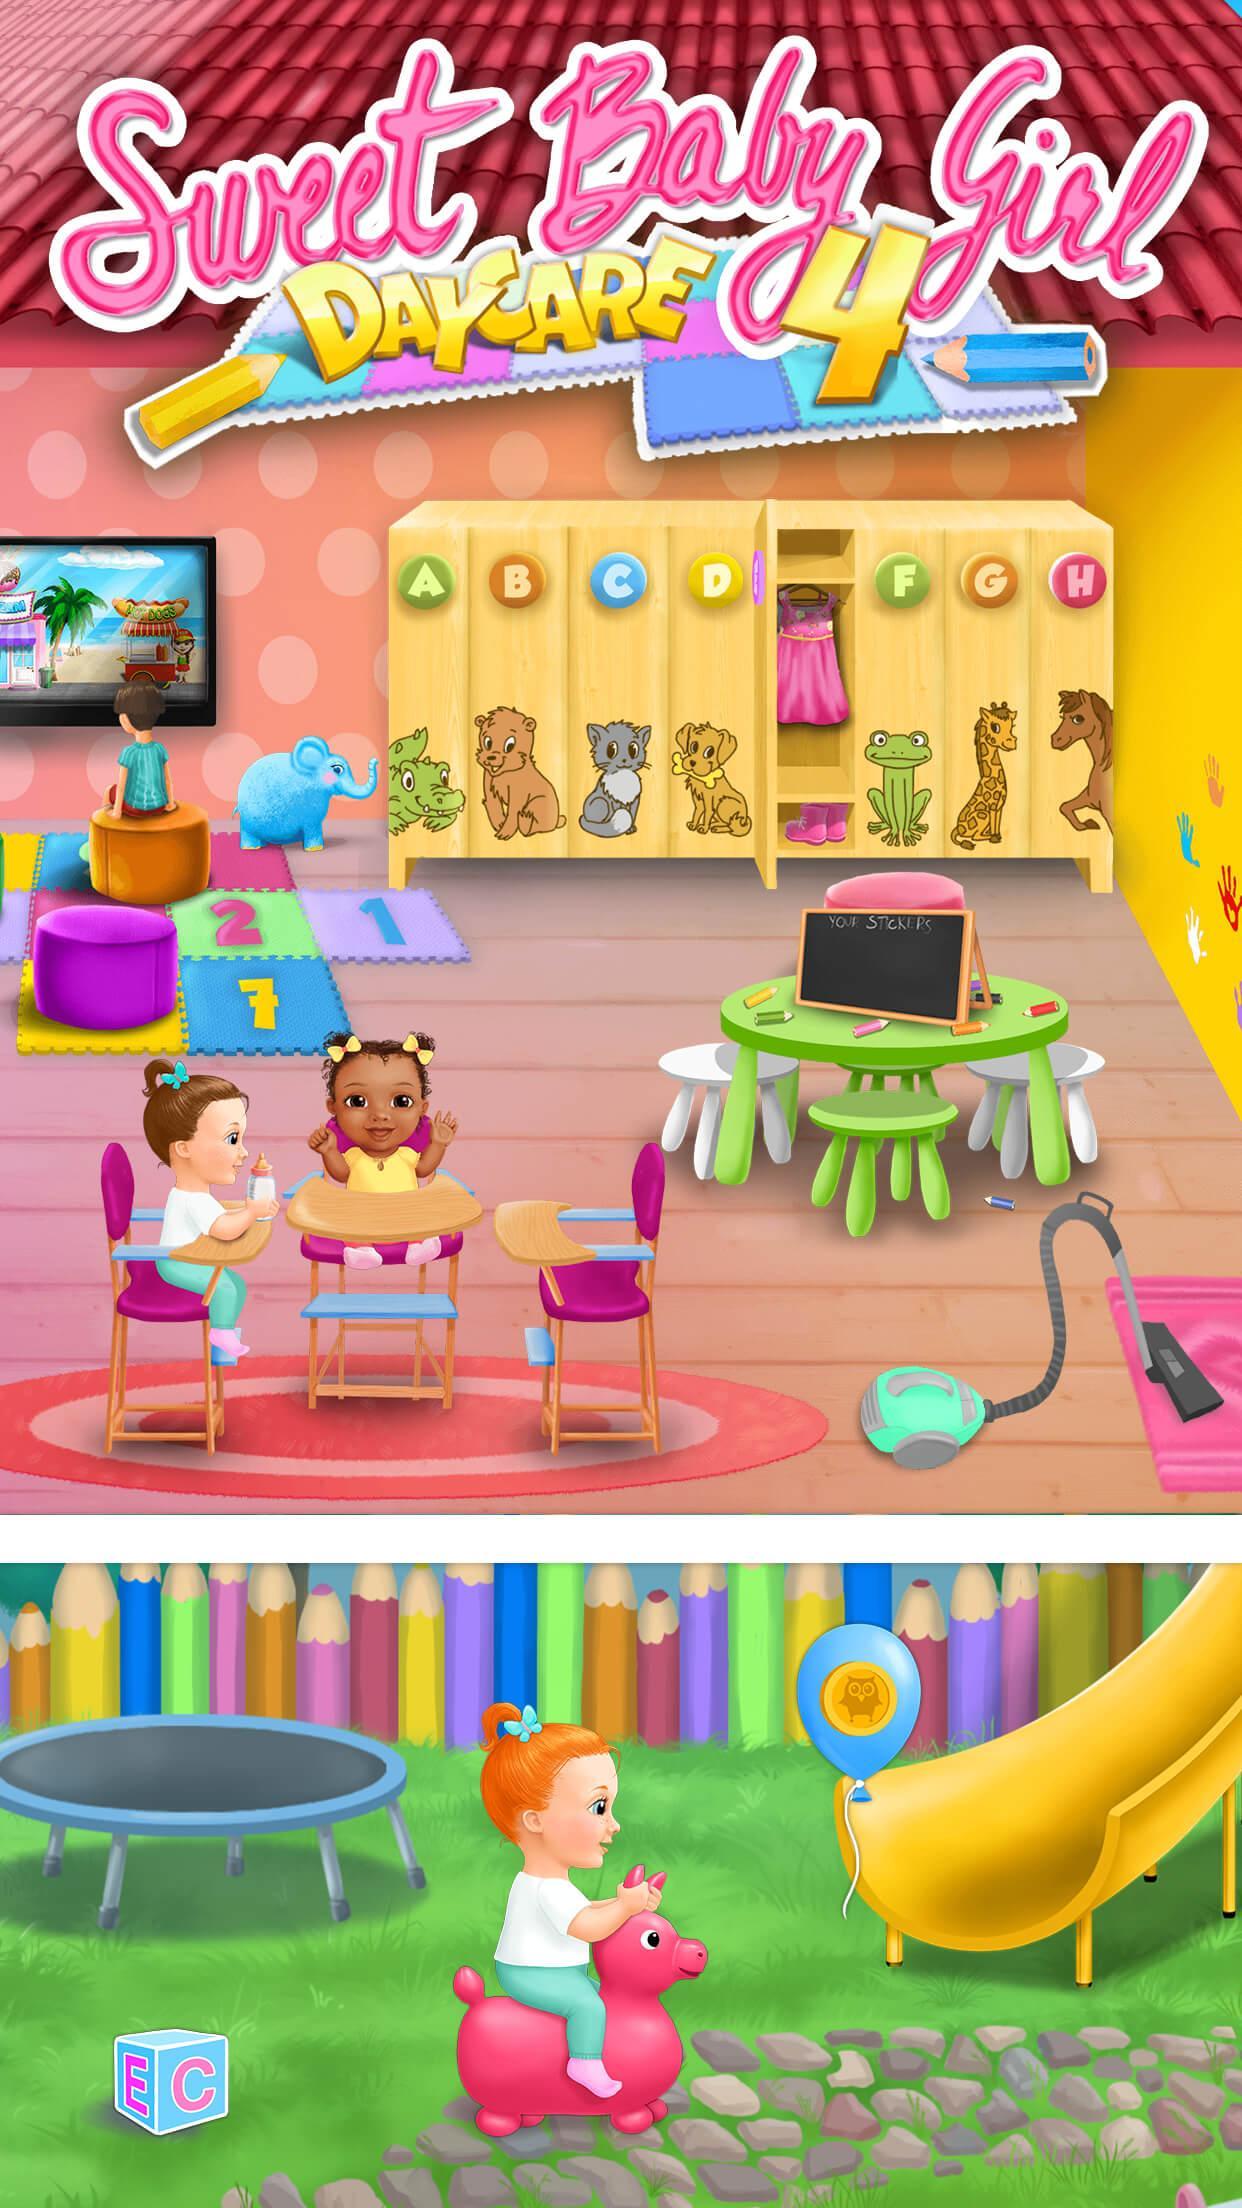 Sweet Baby Girl Daycare 4 For Android Apk Download